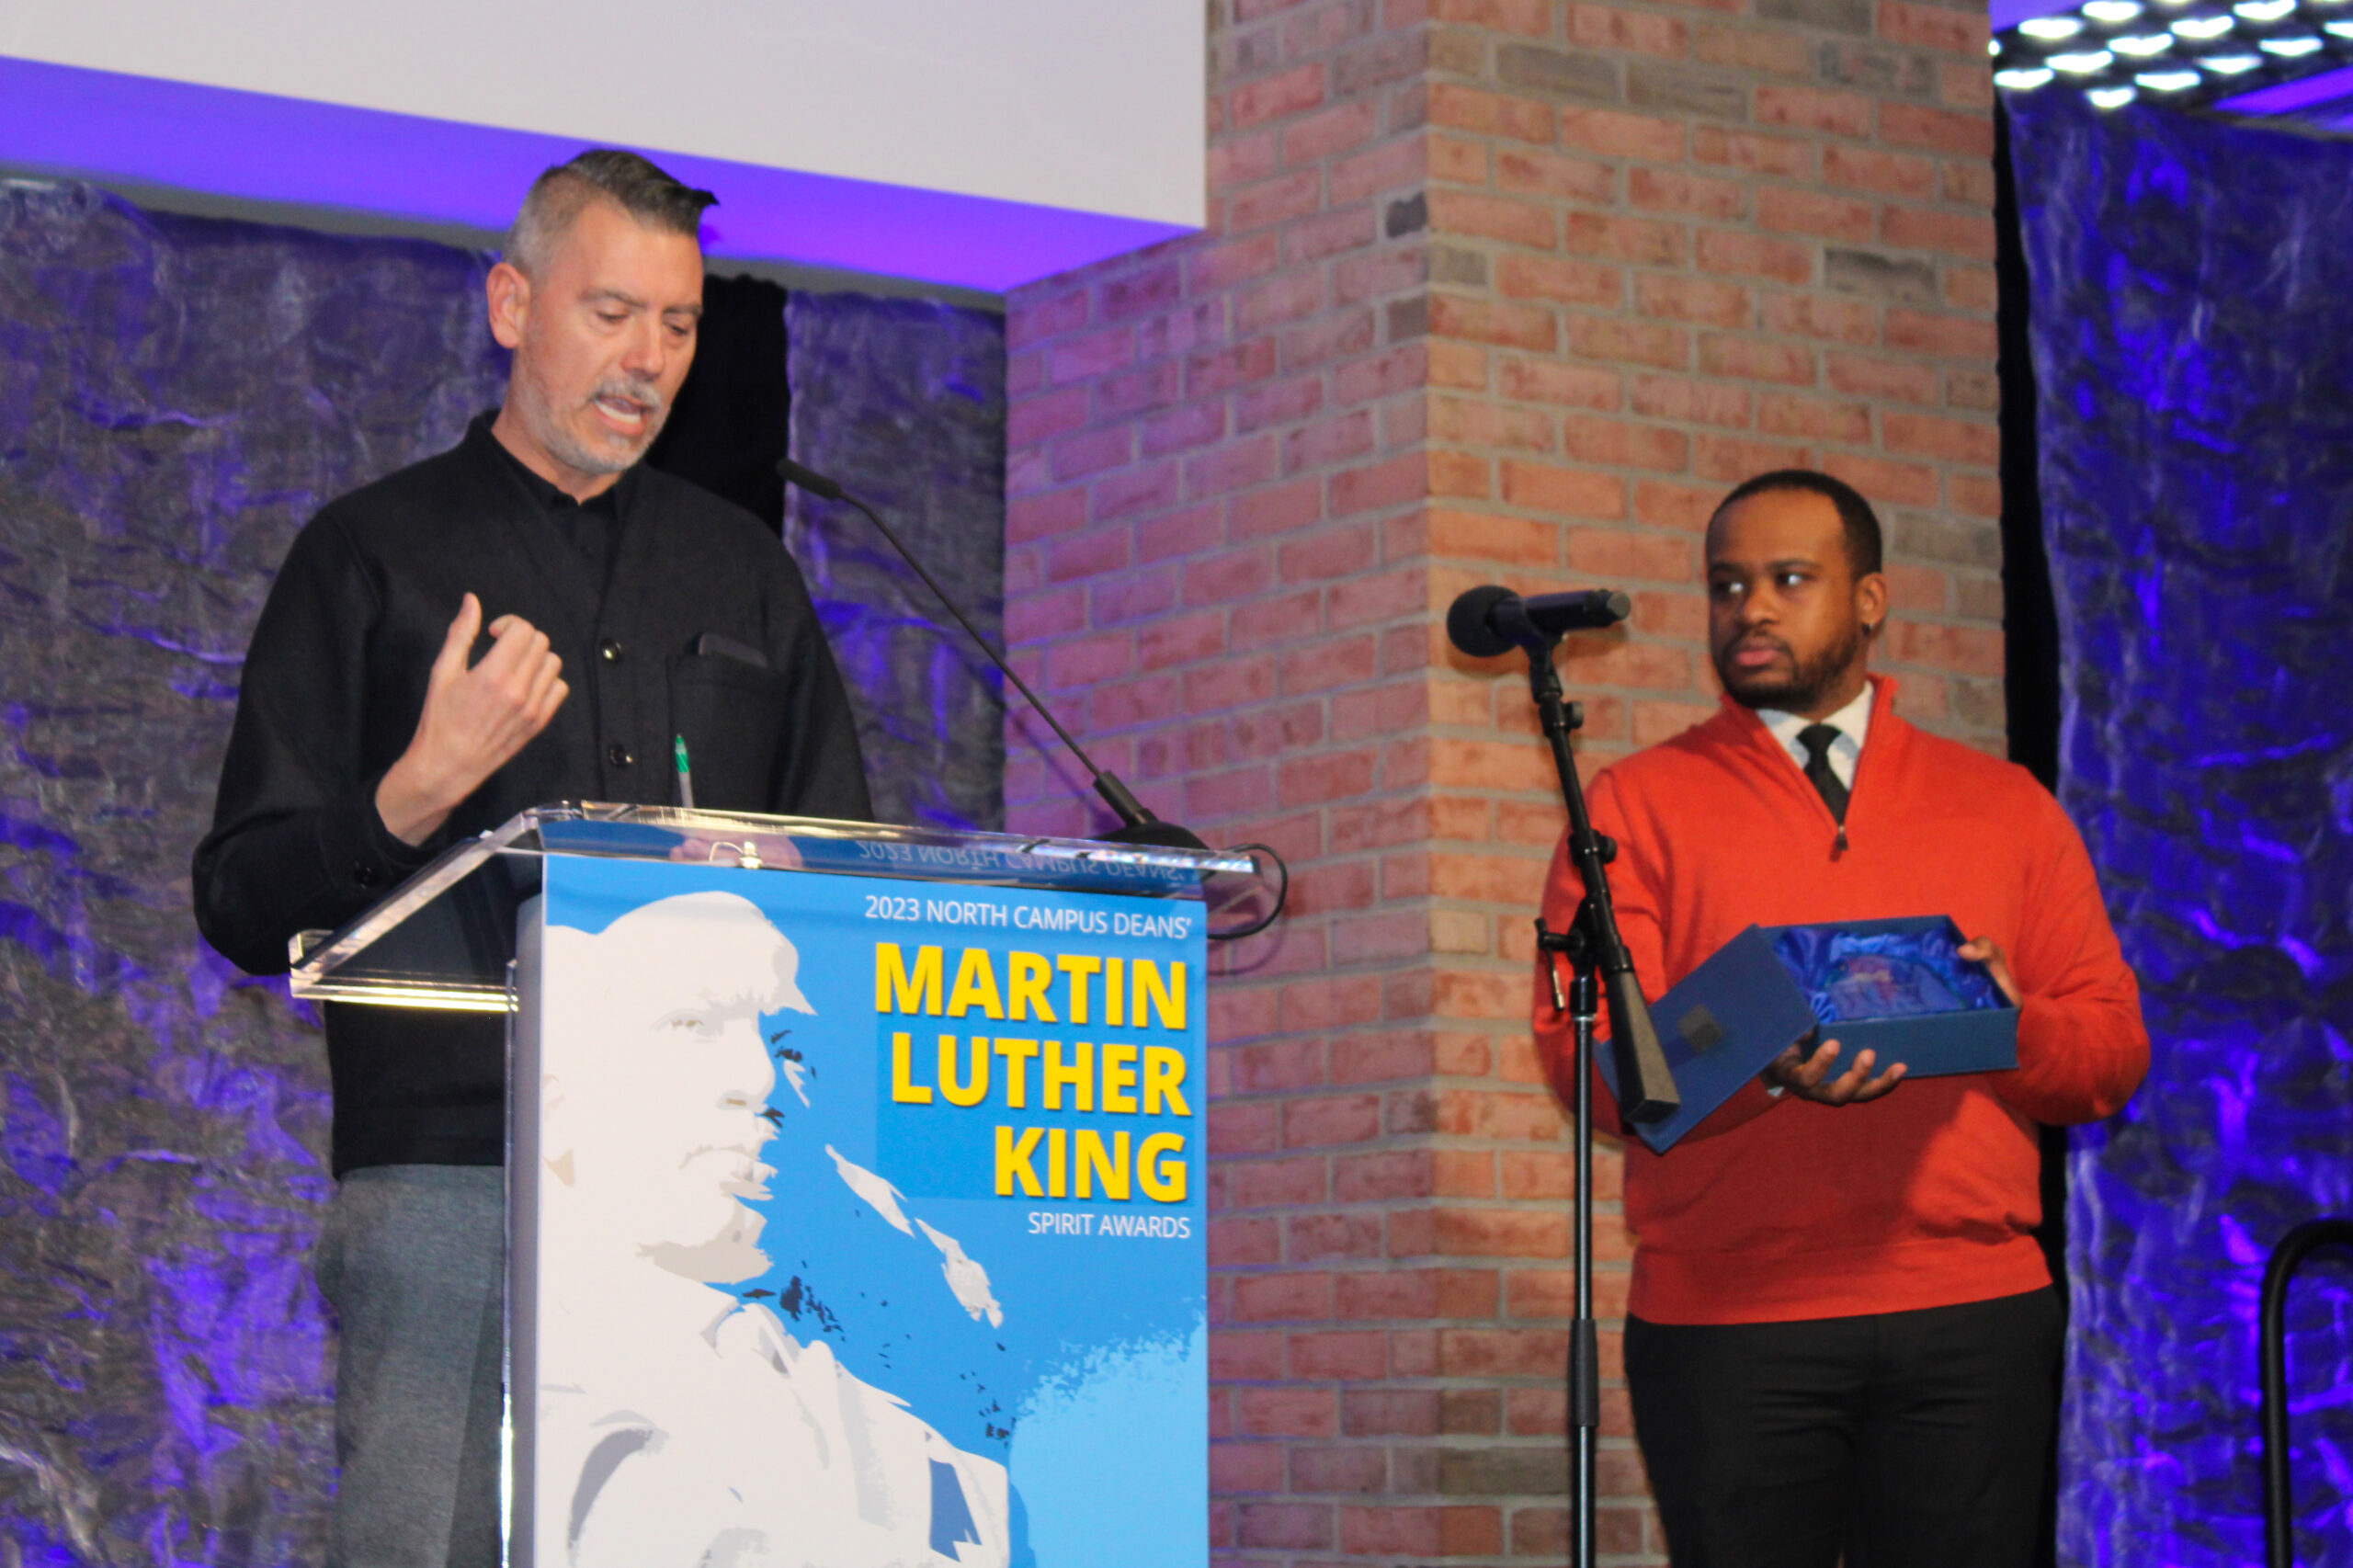 2023 NC Deans' MLK Spirit Awards — Student Recipient Yves Nazon & Jonathan Massey, Dean, A. Alfred Taubman College of Architecture and Urban Planning & Professor of Architecture, Taubman College of Architecture and Urban Planning